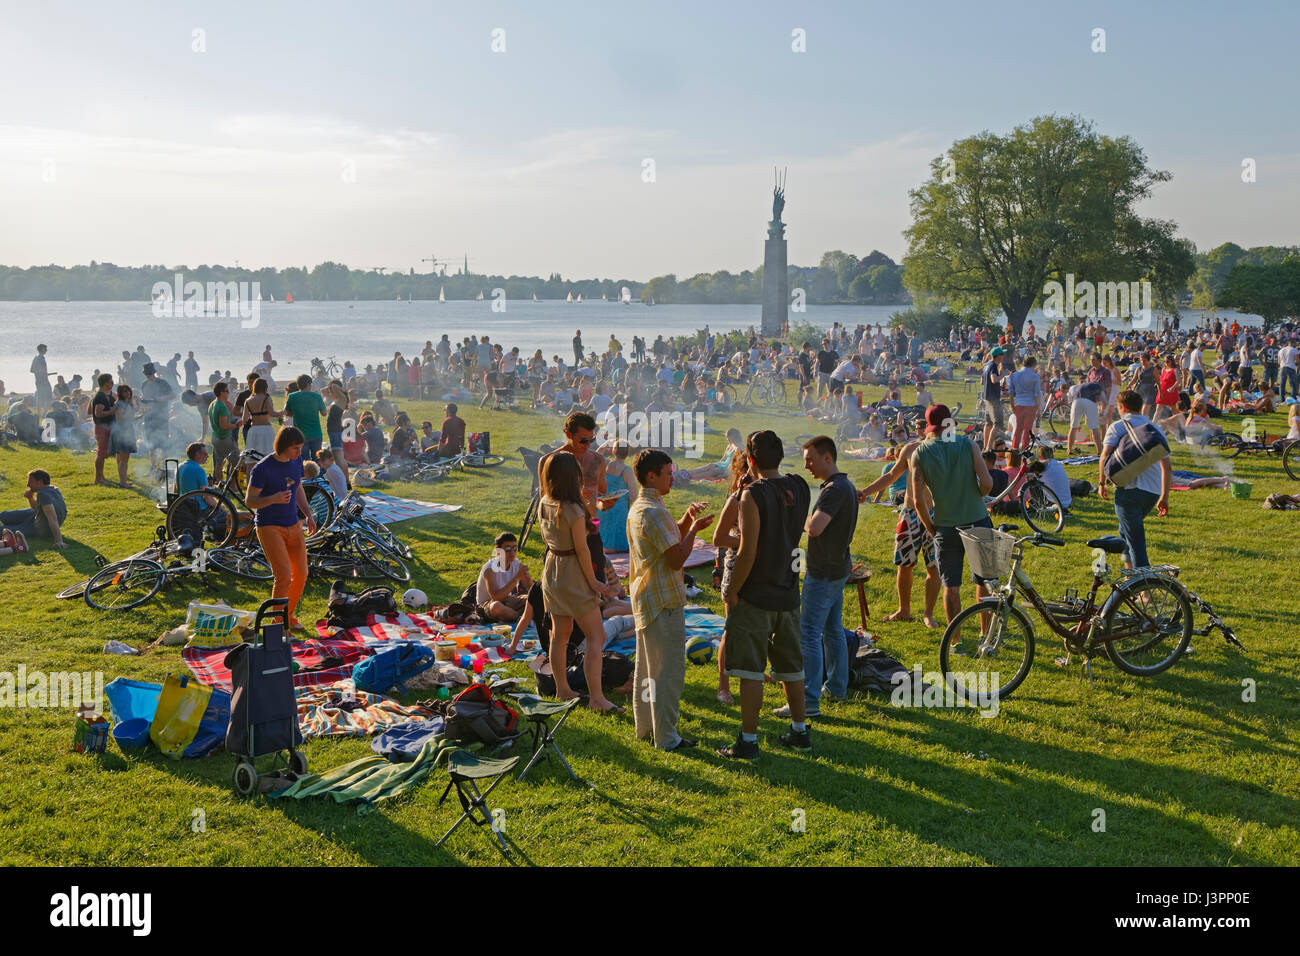 Barbecue at the Outer Alster, Hamburg, Germany, Europe Stock Photo